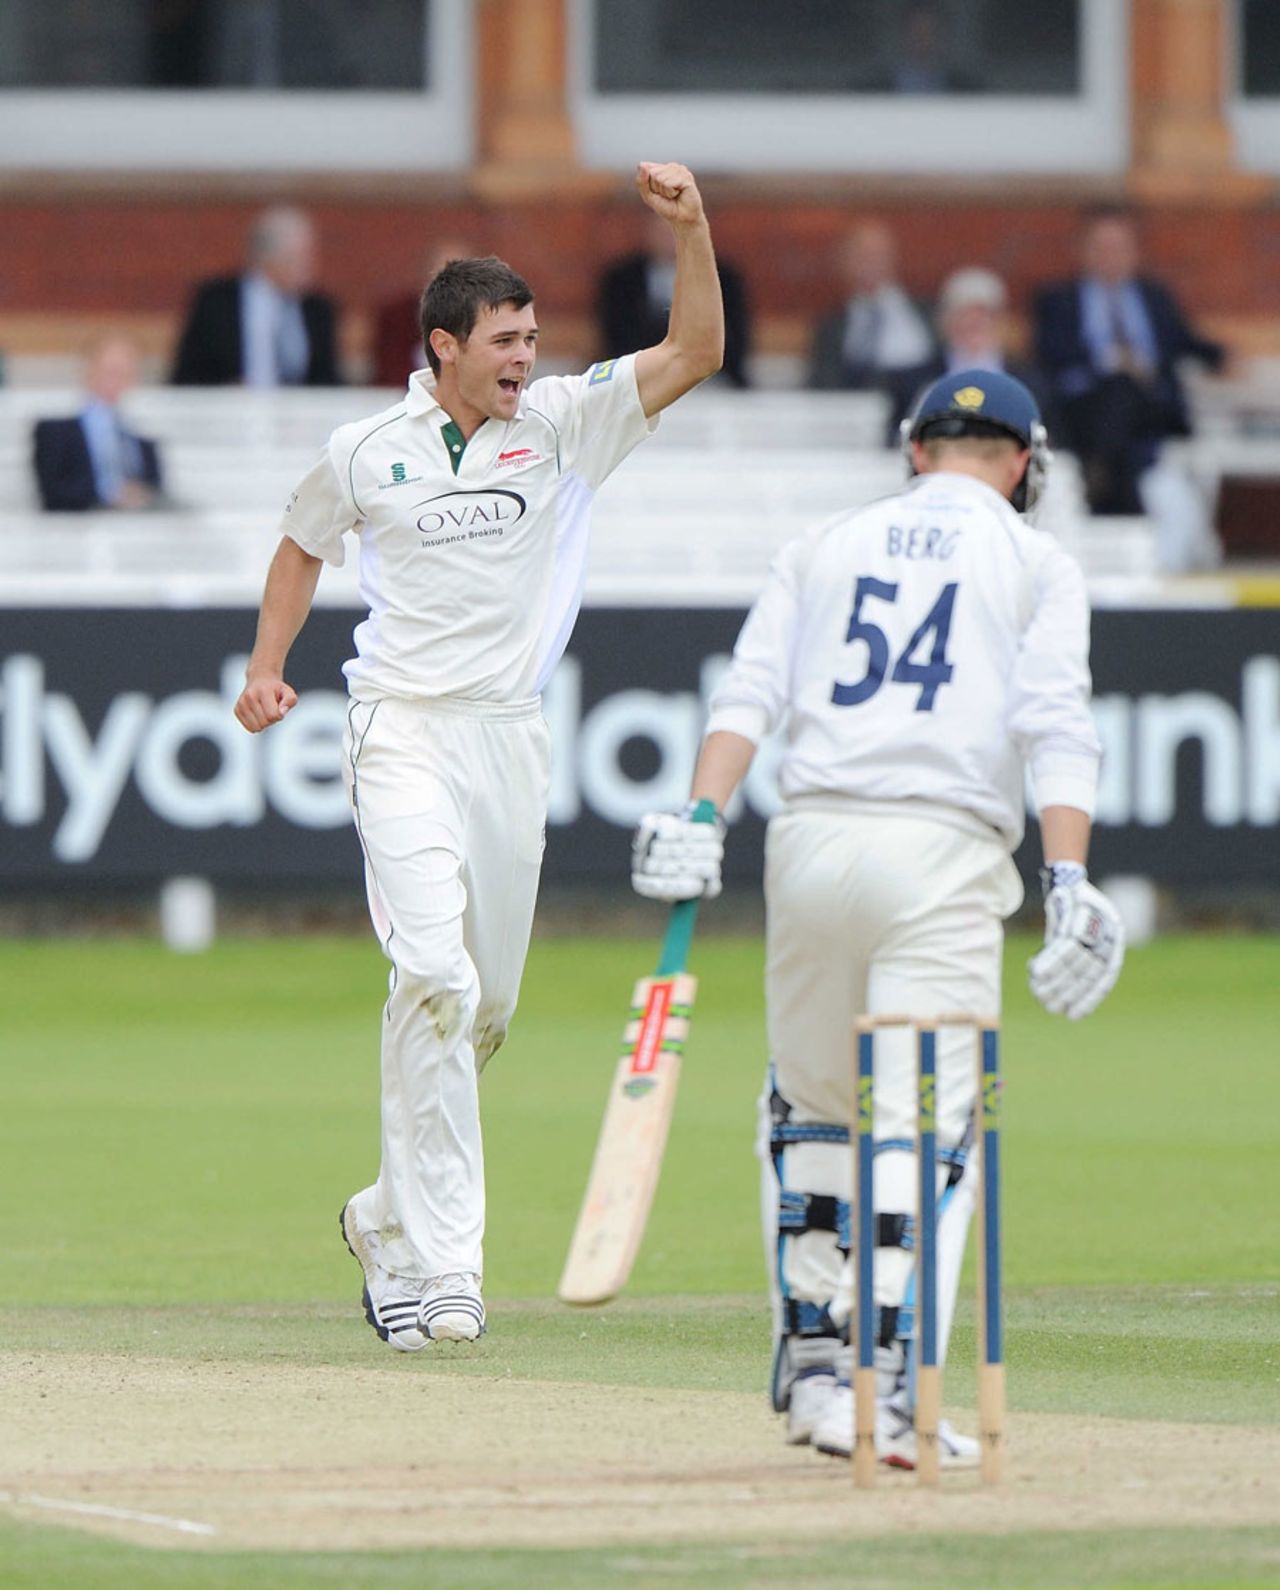 Nathan Buck claimed the wicket of Gareth Berg on the final day at Lord's, Middlesex v Leicestershire, County Championship, 4th day, August 12, 2010